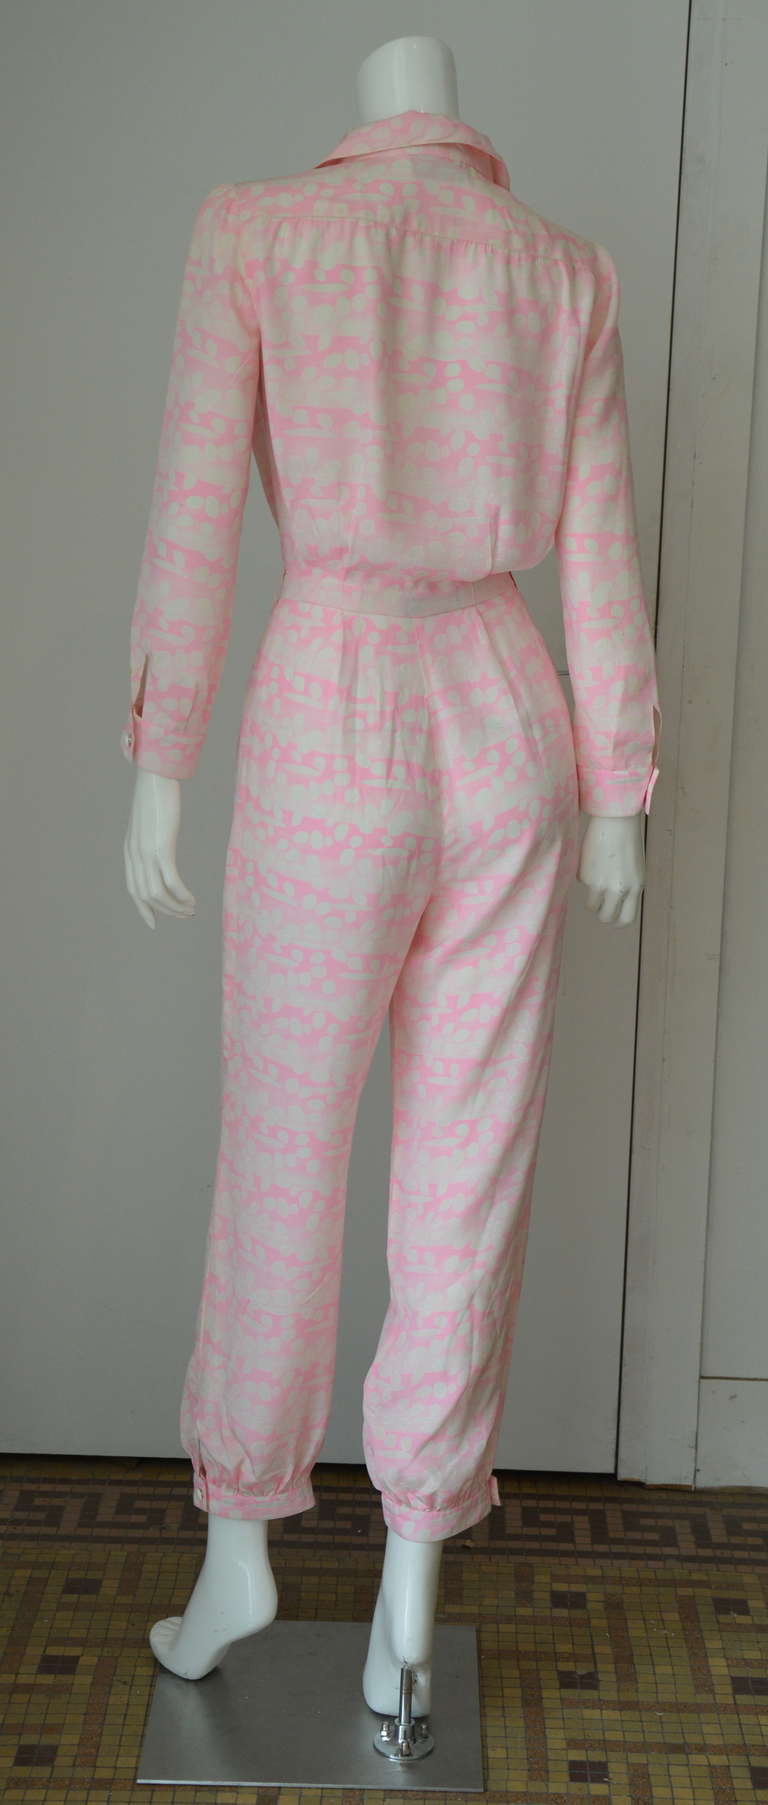 A fine and rare vintage Courreges silk jumpsuit. Light pink and off white abstract motifs features 2 front pockets, button arm & leg closures. Pristine condition.
Total Lengh ; 142 cm / 55,9 in
Courreges size 0 which is a FR 36, 4-6 US or a